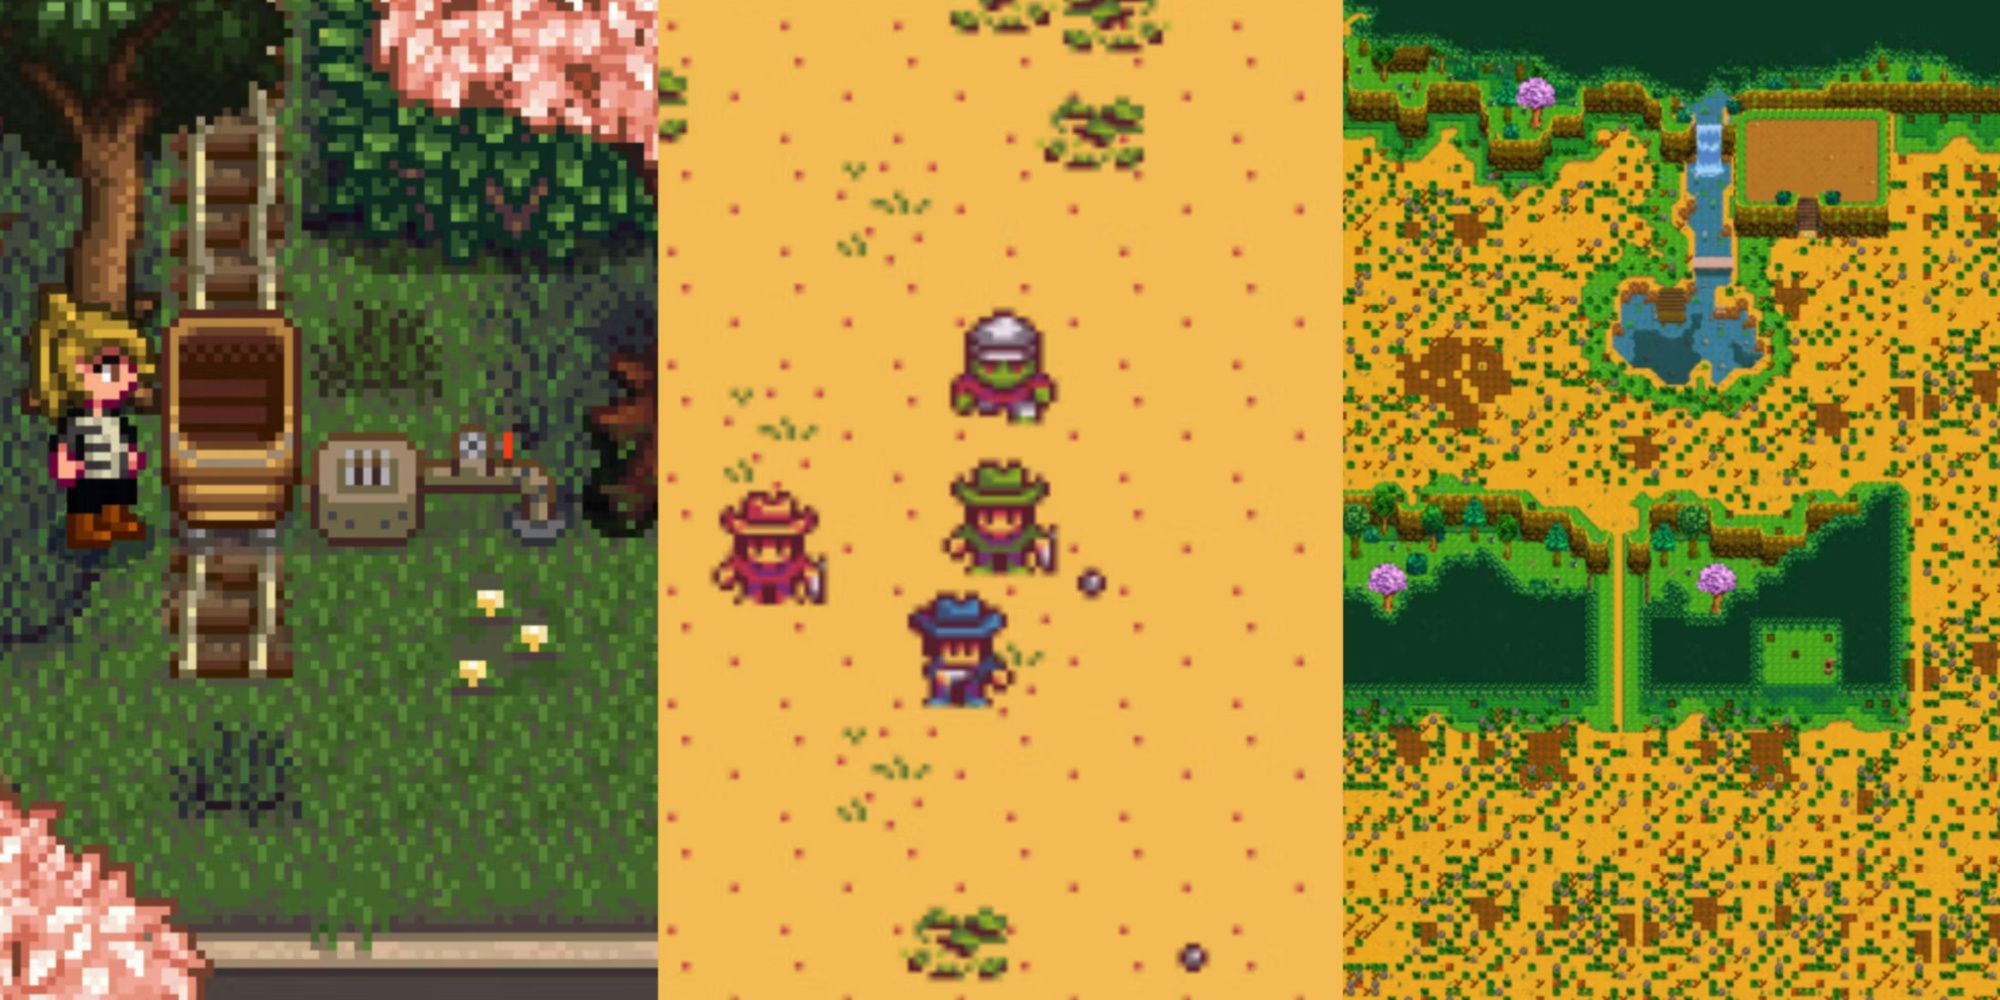 How to easily mod Stardew Valley on PC